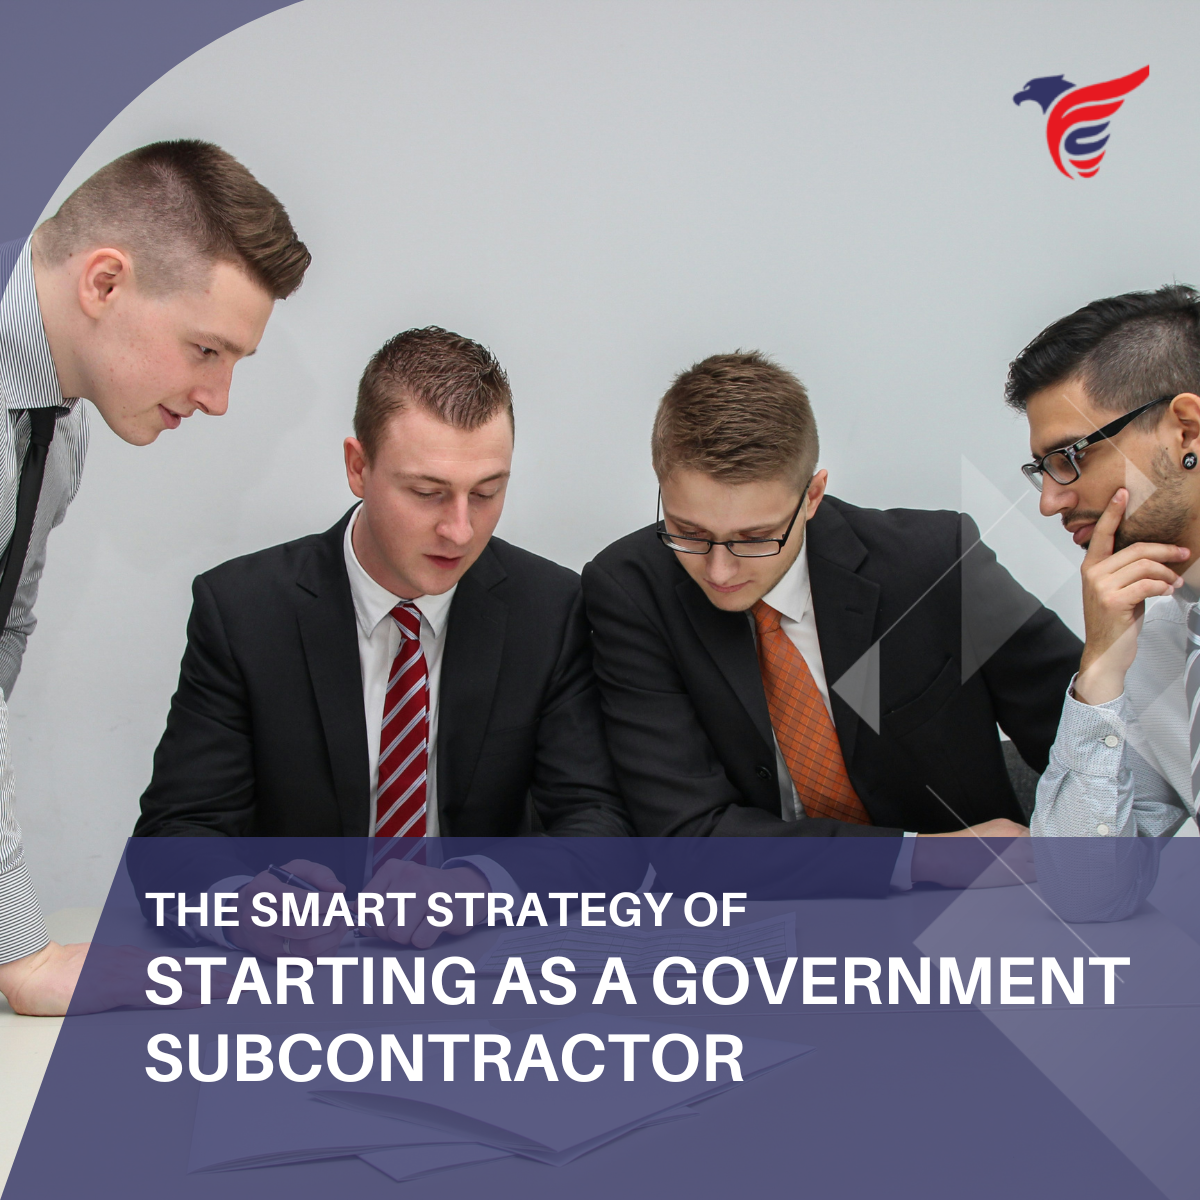 The Smart Strategy of Starting as a Government Subcontractor